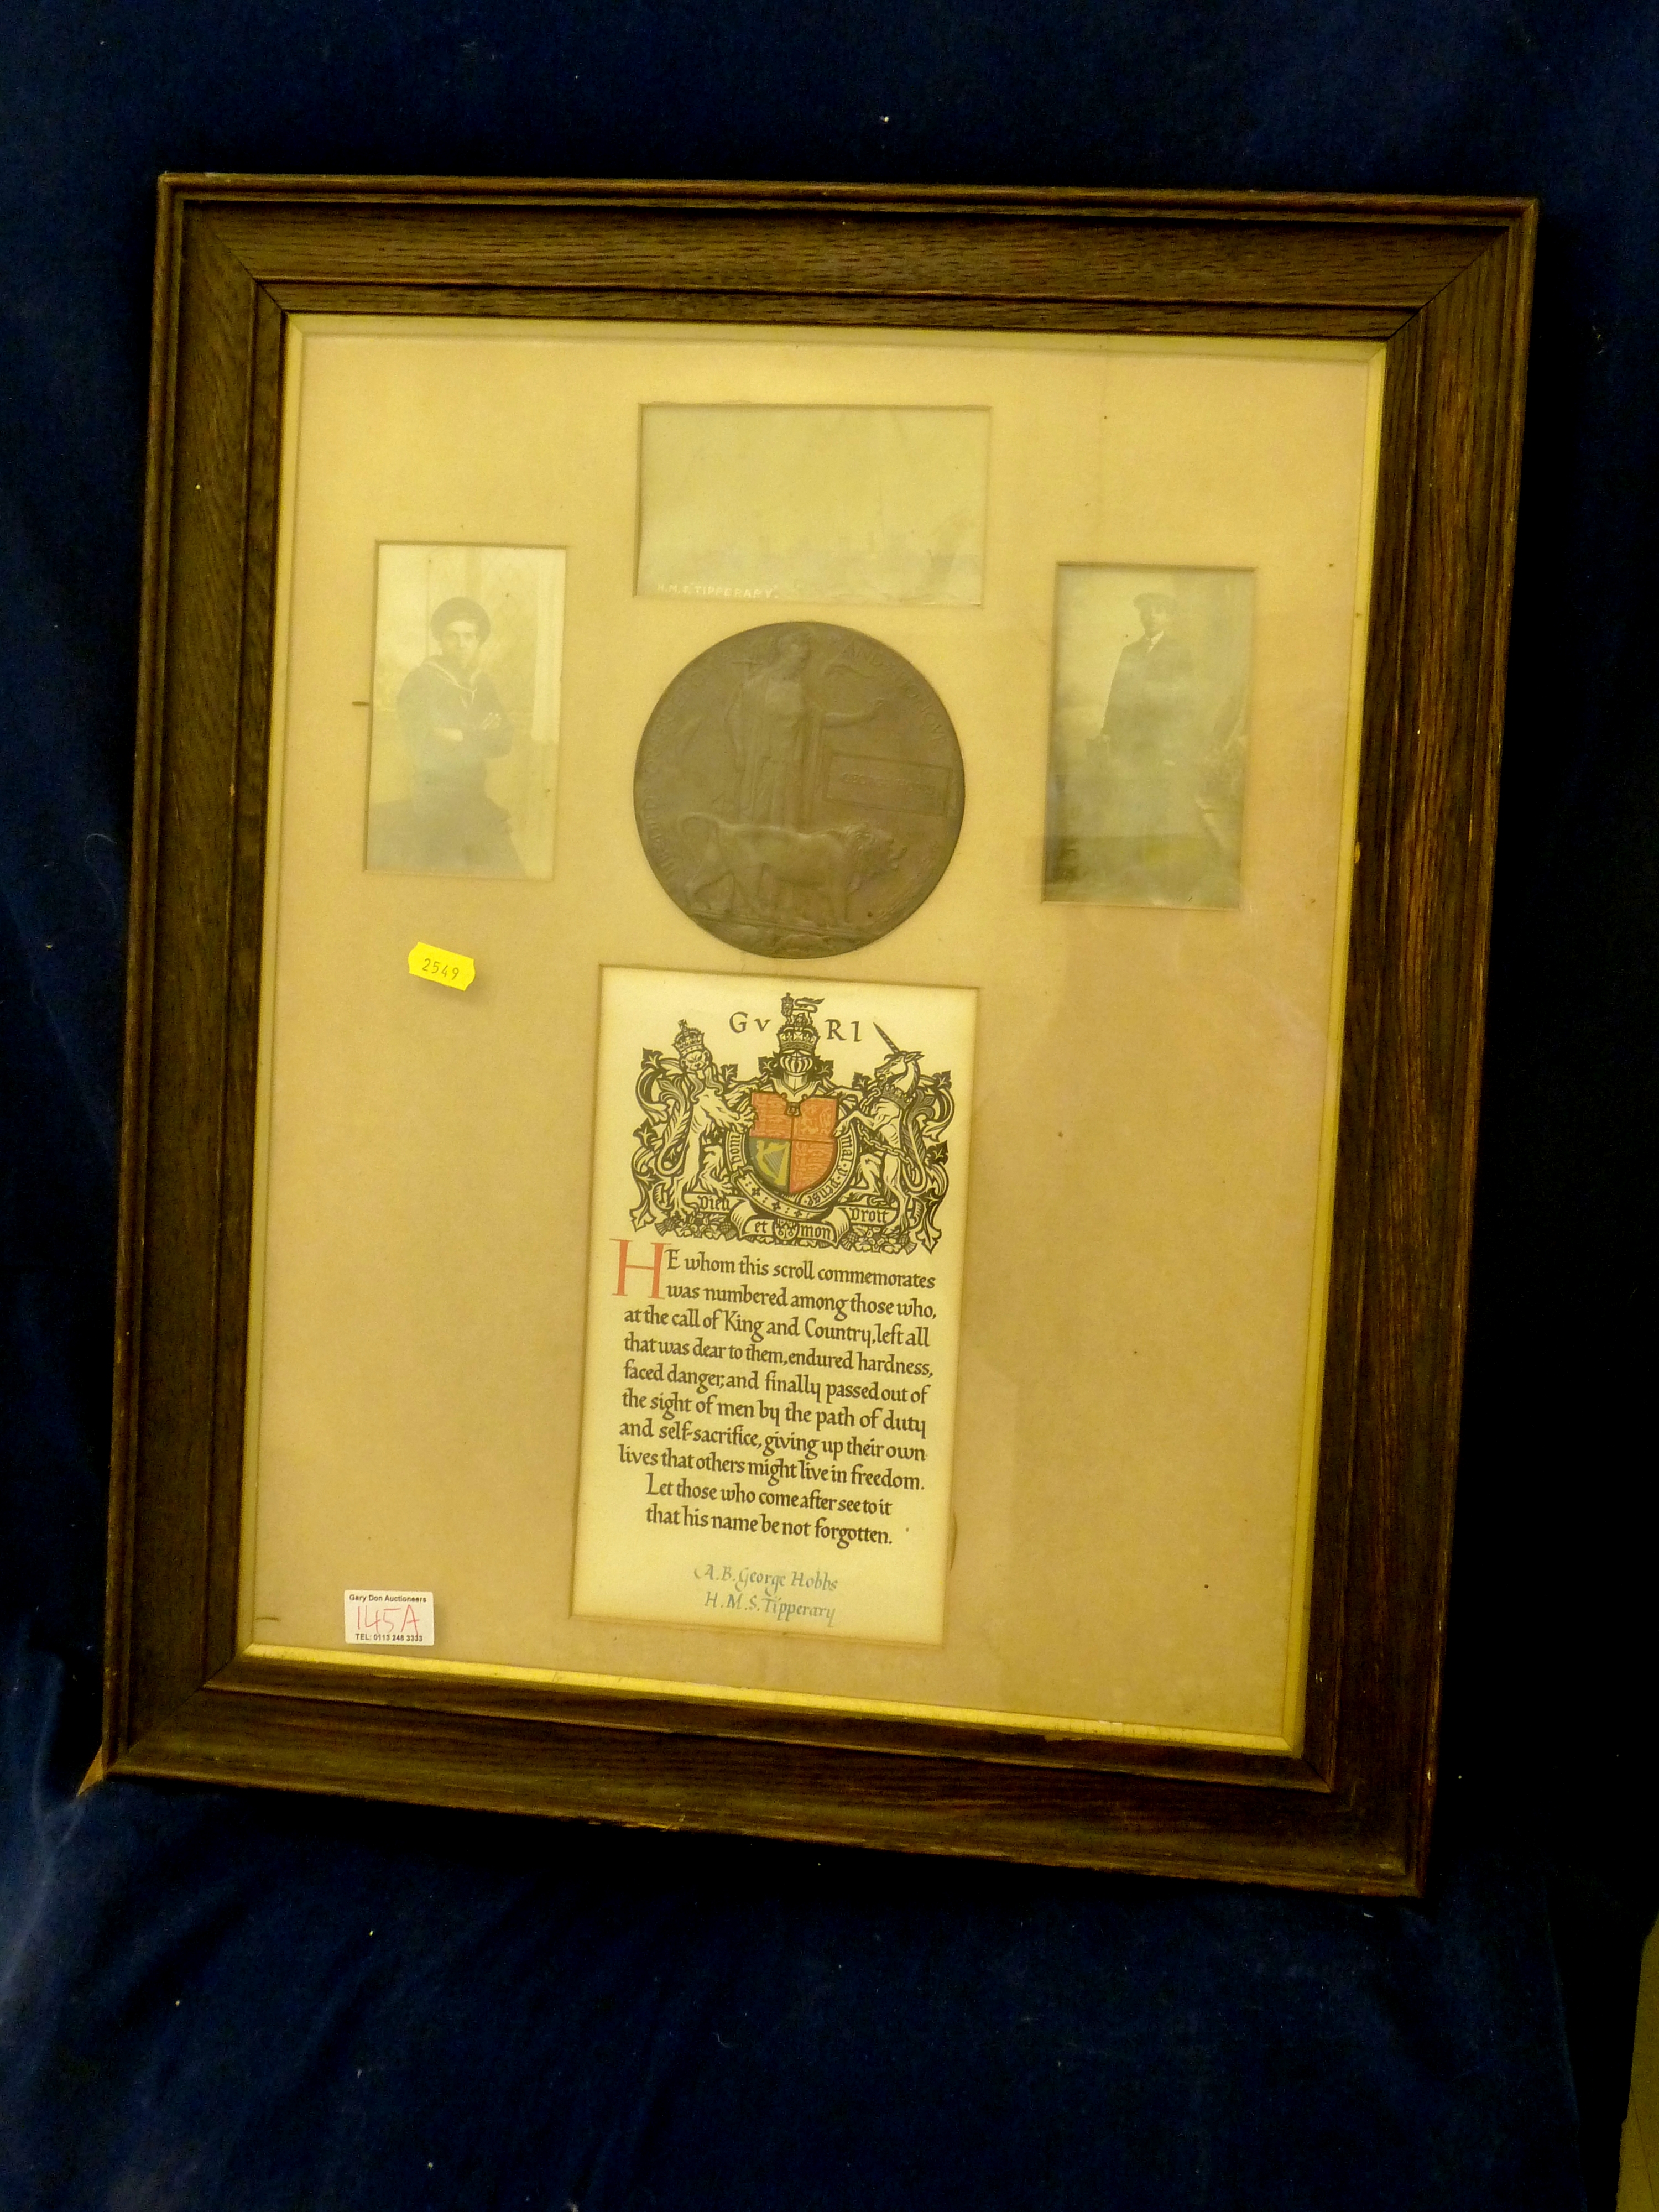 FRAMED DEATH PLAQUE AWARDED TO GEORGE HOBBS WITH PHOTOGRAPHS INCLUDING OF HMS TIPPERAY